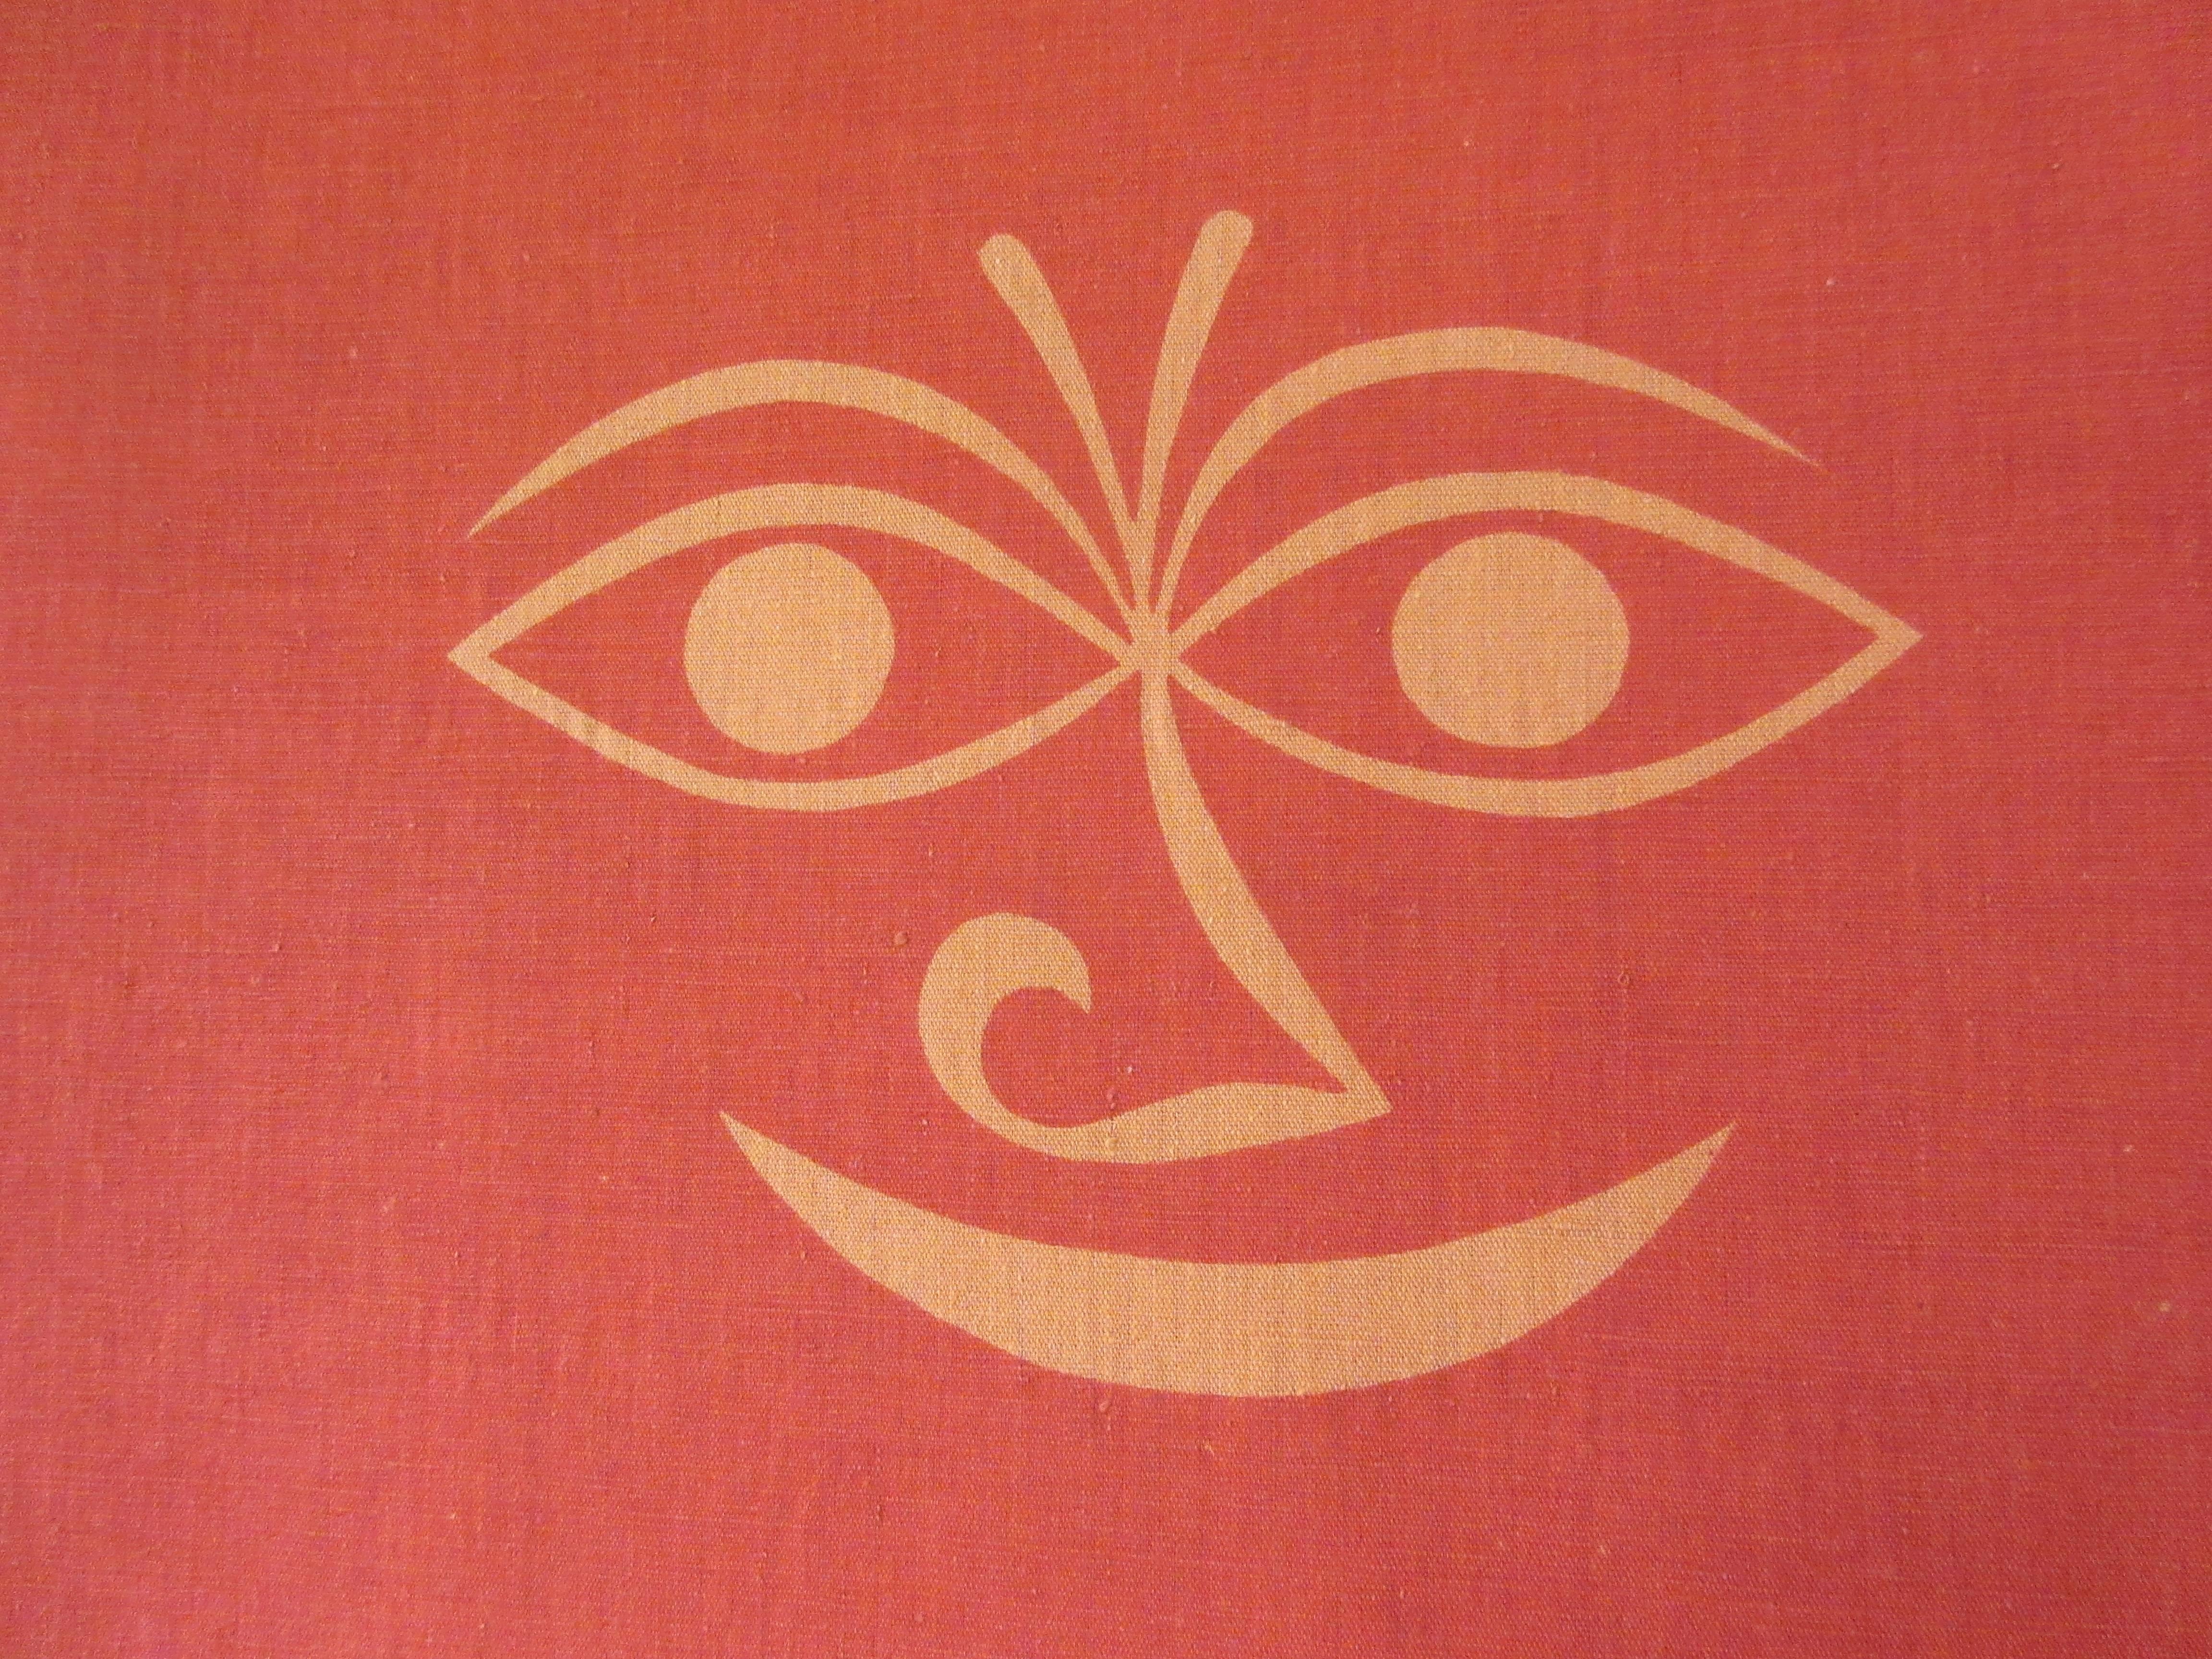 Alexander Girard vintage Environmental Enrichment Panel for Herman Miller dated 1972 designed to be used with the George Nelson Action office Systems. Made of Mexicotton and featuring the smiling sun image in light and darker shades of orange.